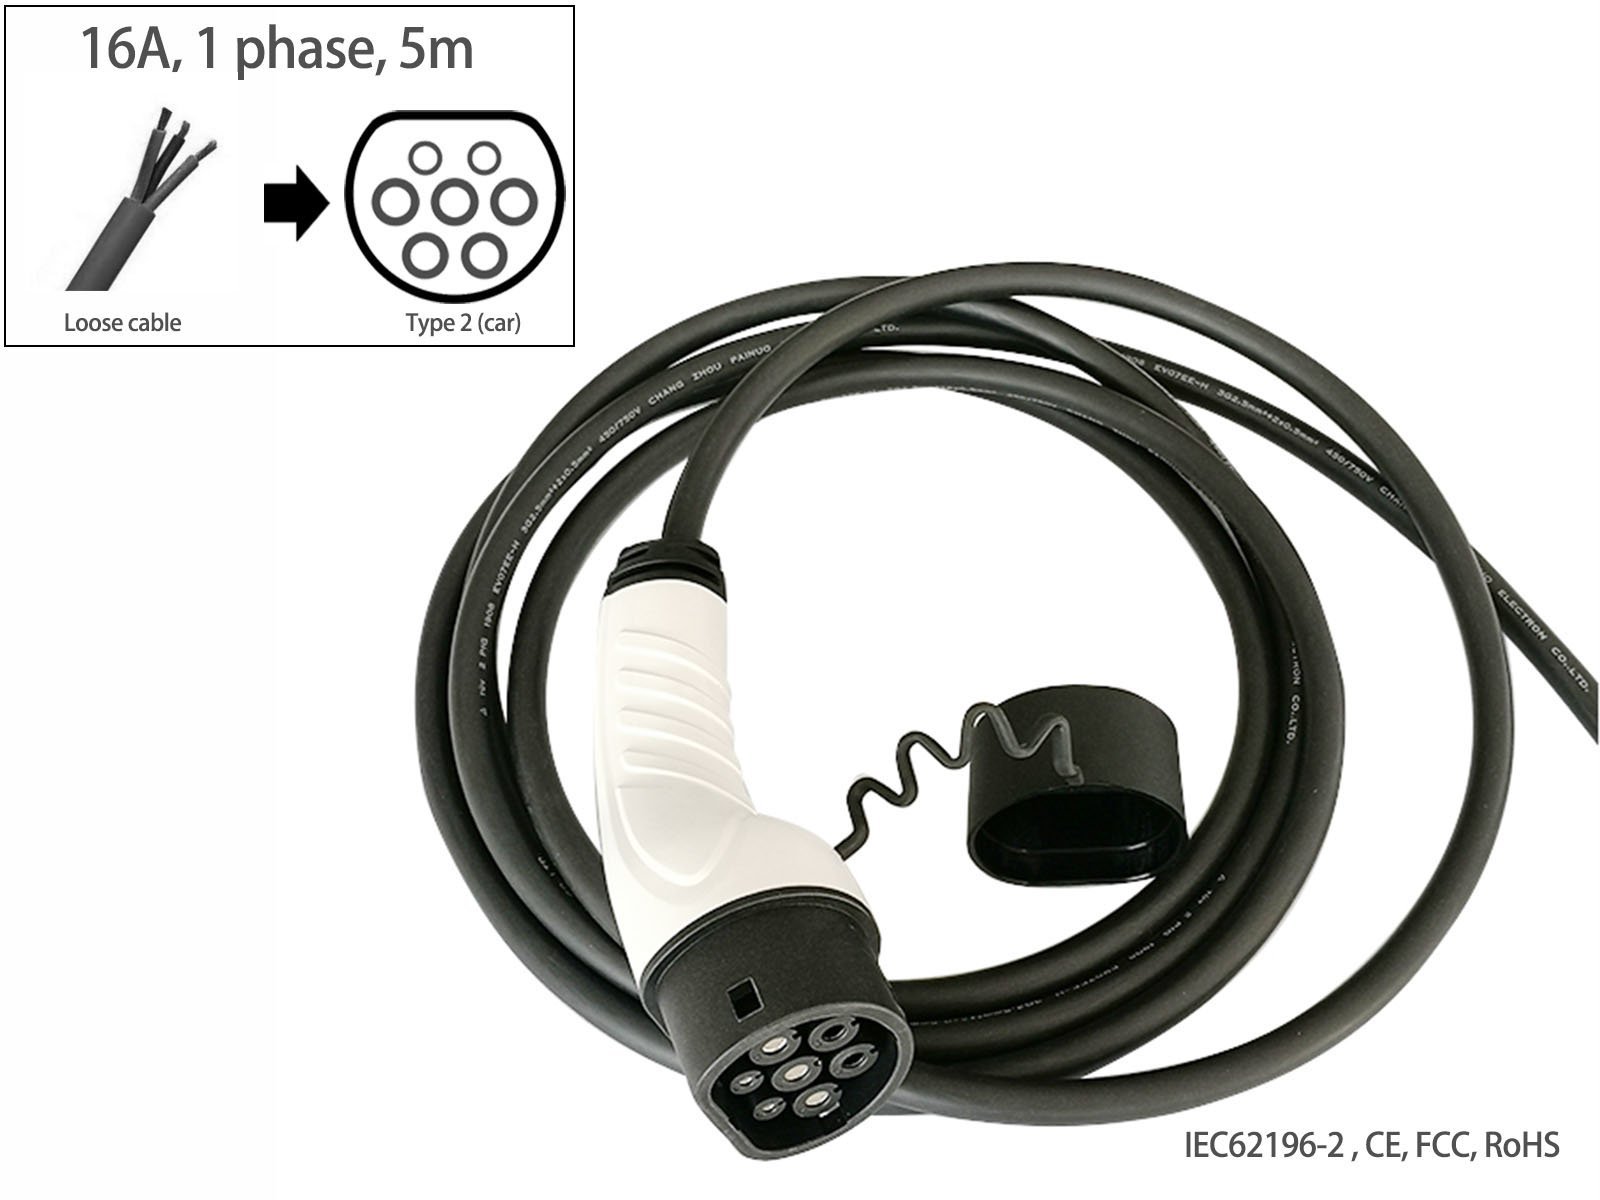 EV charging cable,Loose cable to Type 2 (car),16A,single phase,5m,Fisher - Torque Alliance